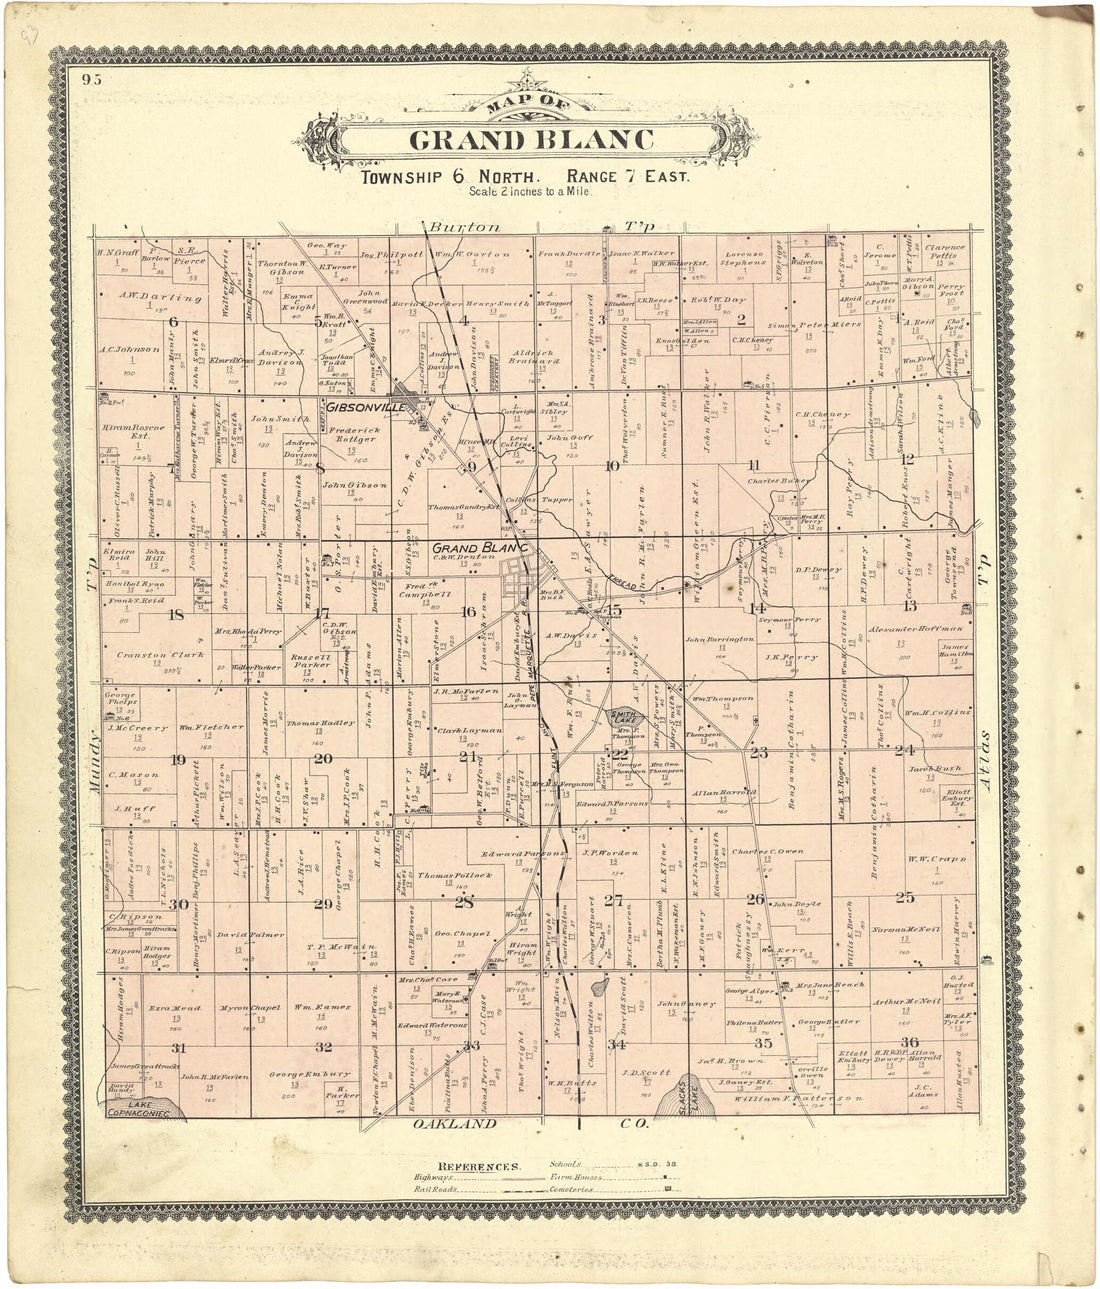 This old map of Map of Grand Blanc from Atlas of Genesee County, Michigan from 1889 was created by W. (William) Wangersheim in 1889